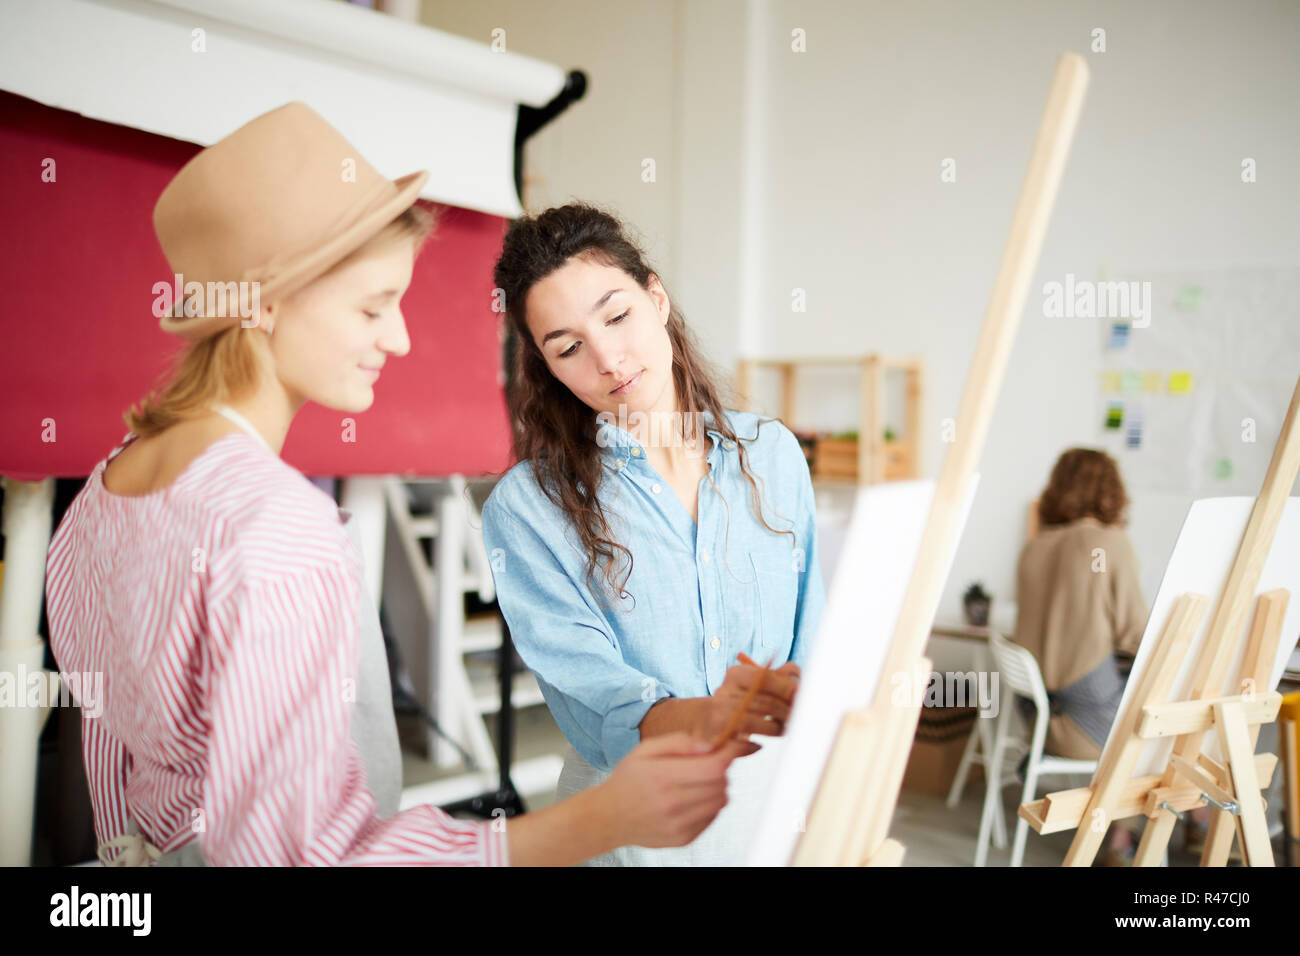 Discussing painting Stock Photo